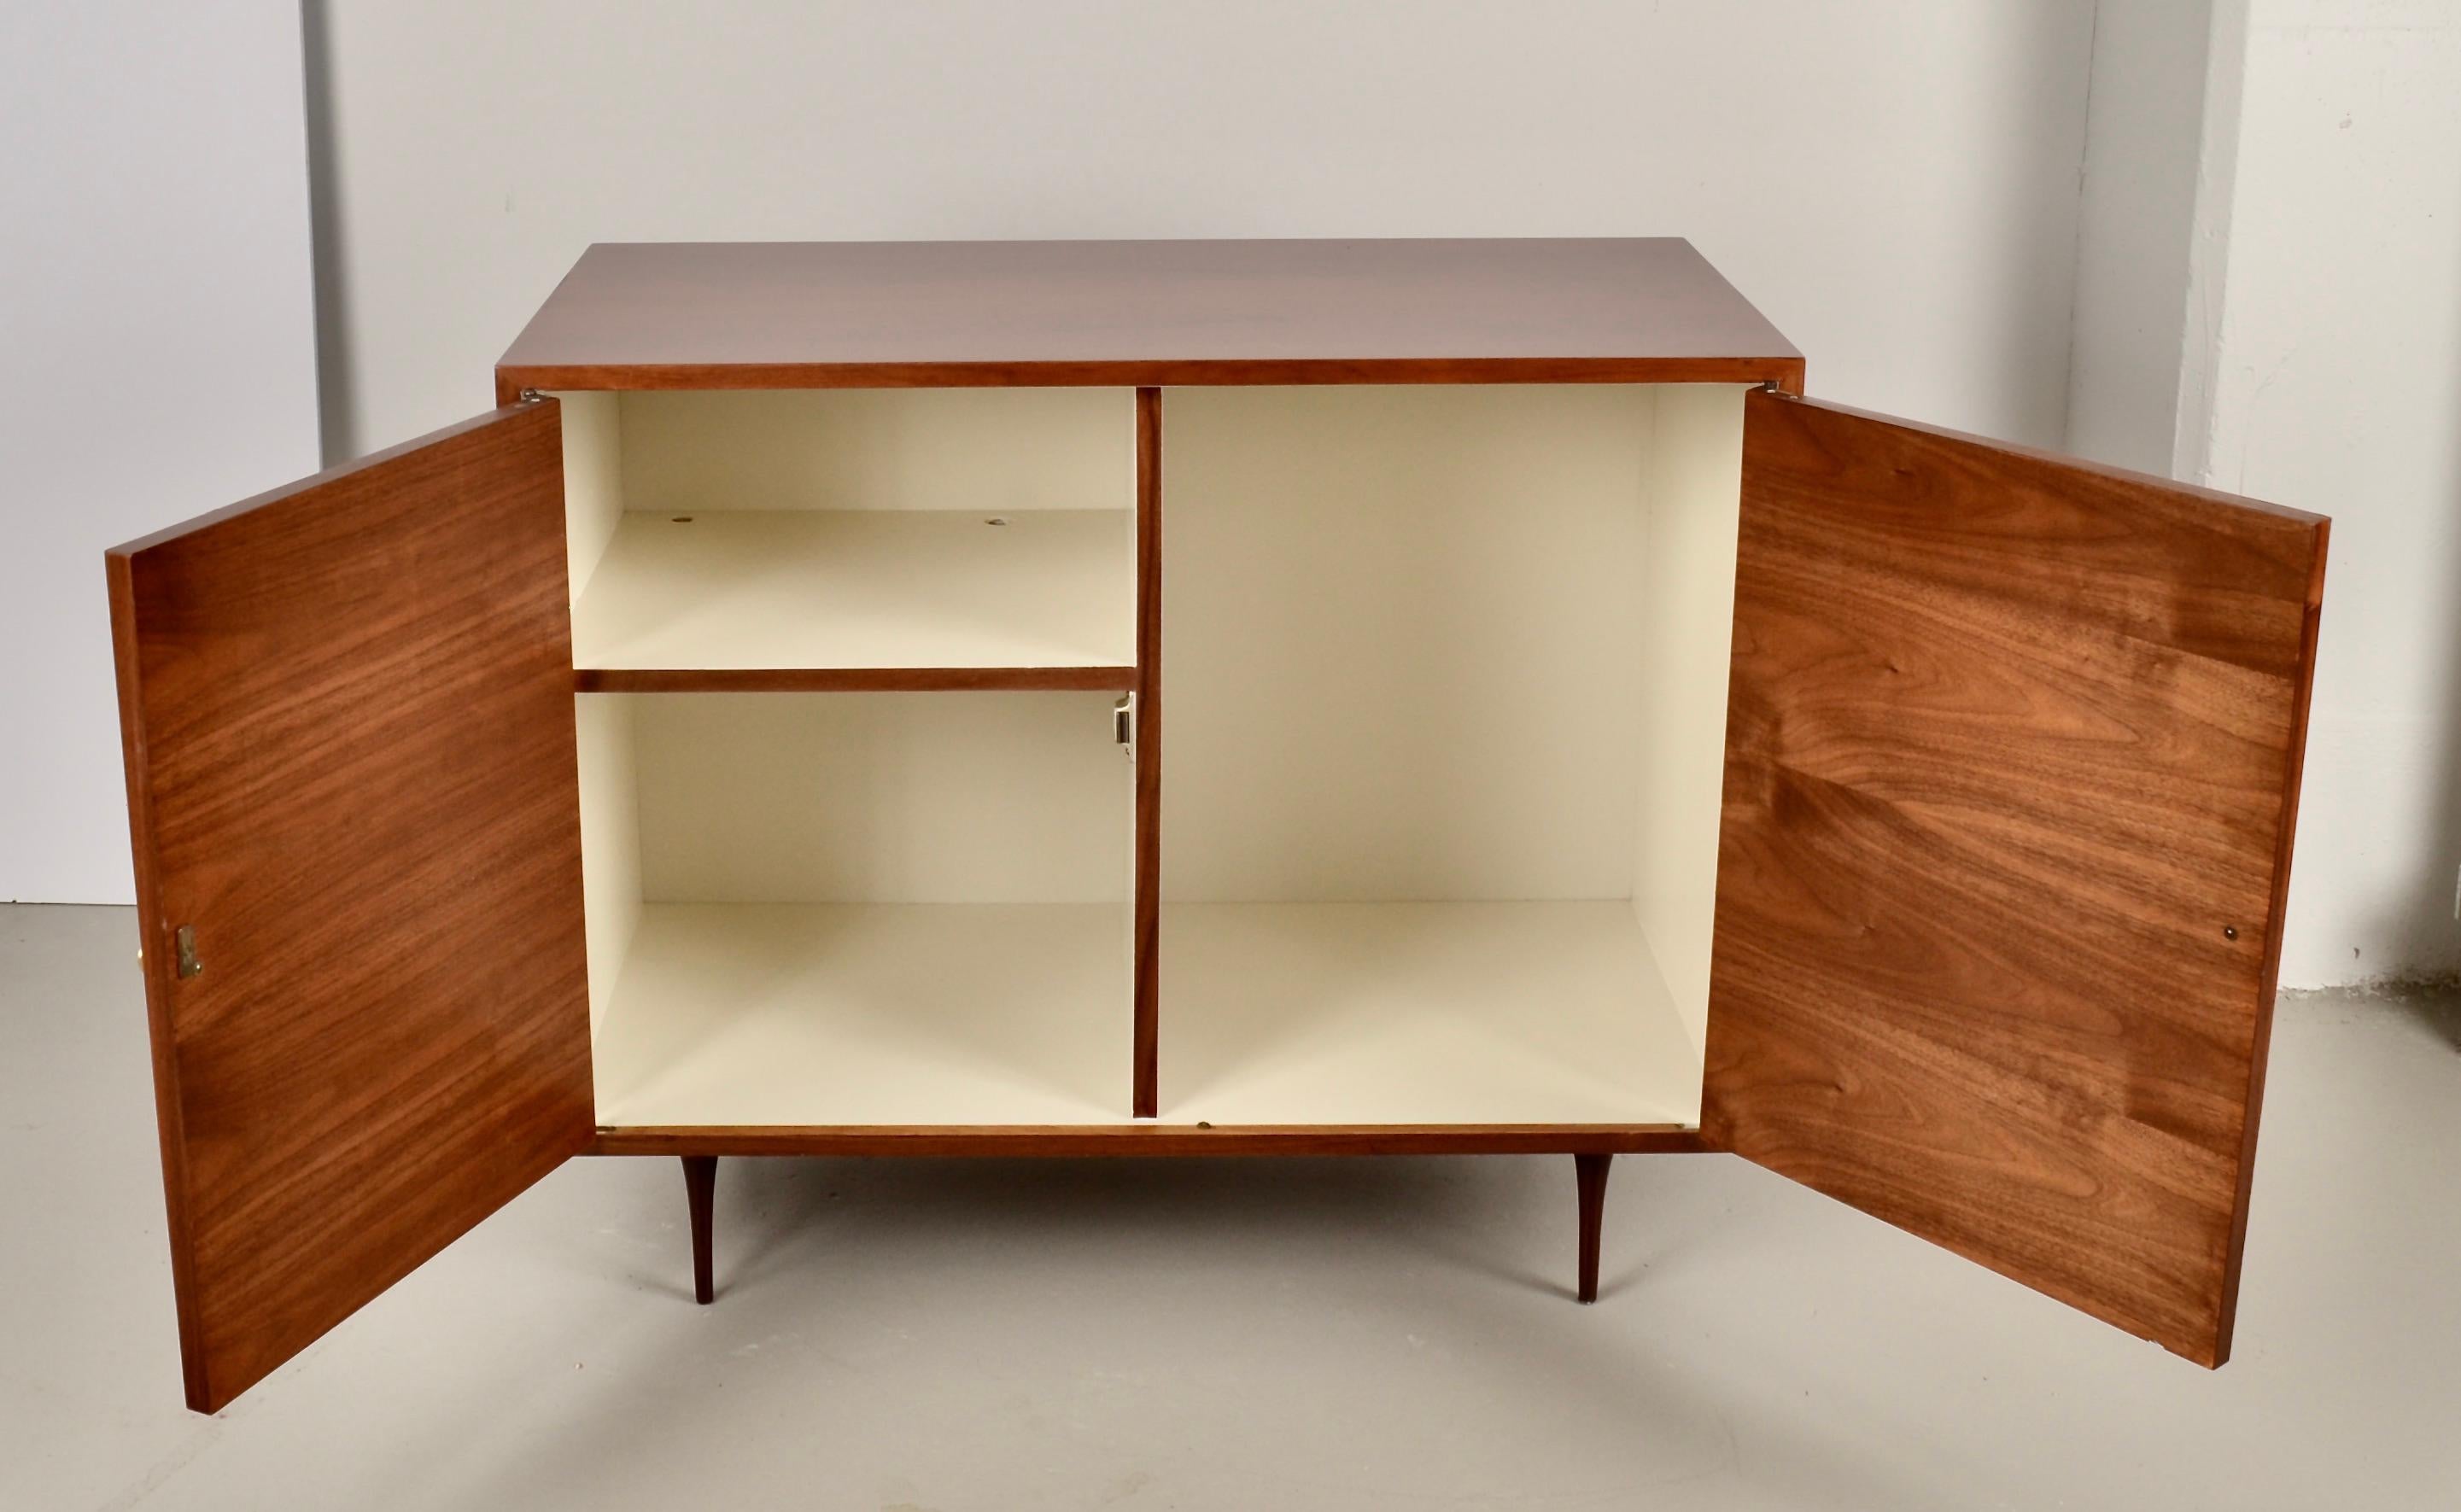 Mid-20th Century Modern Walnut Credenza with Laminate Doors, USA, 1960s For Sale